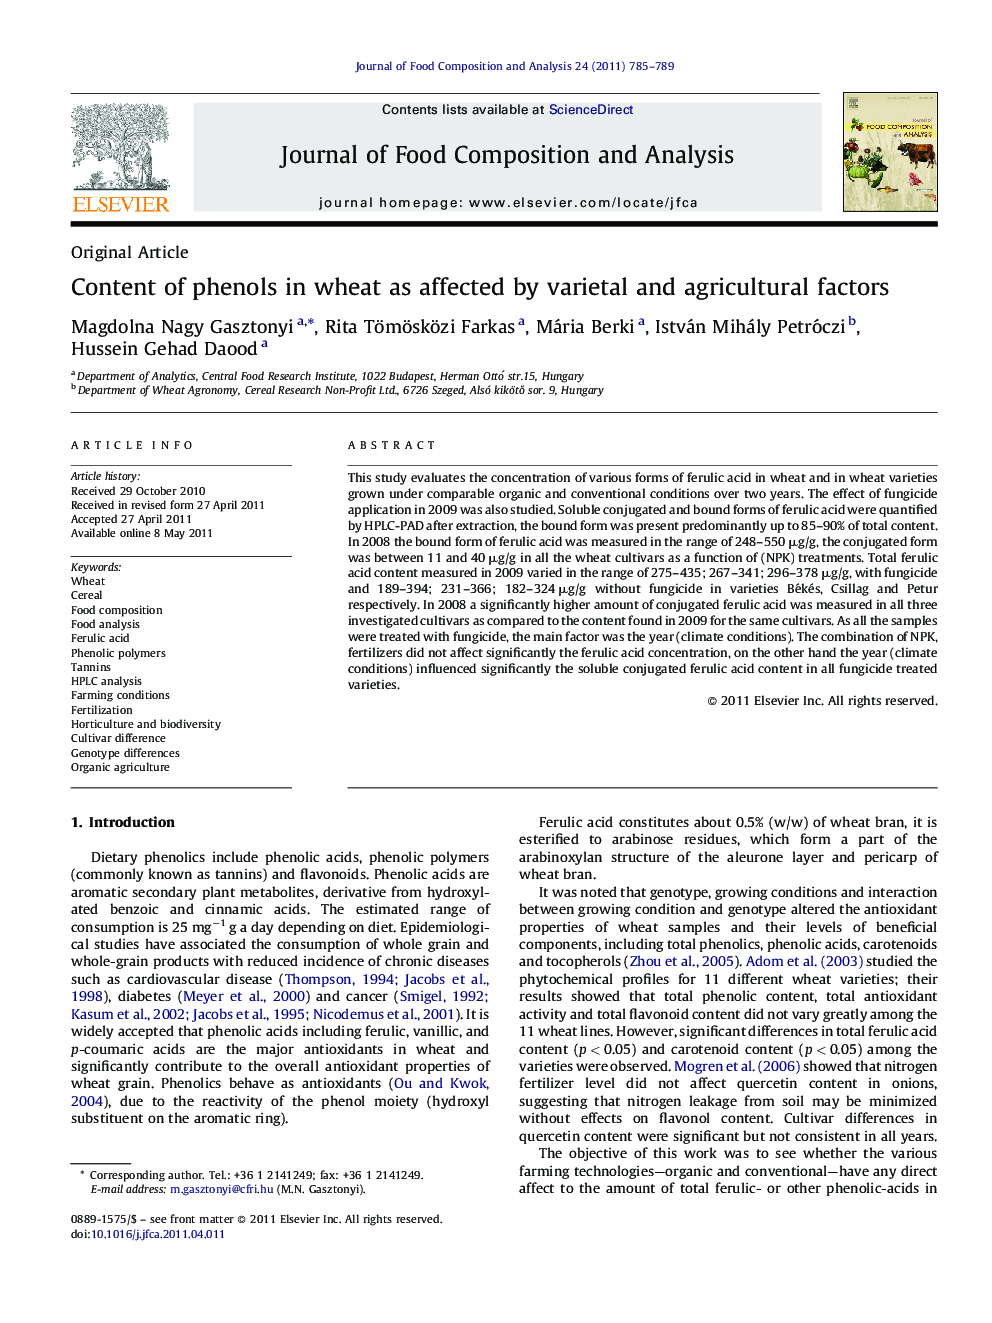 Content of phenols in wheat as affected by varietal and agricultural factors